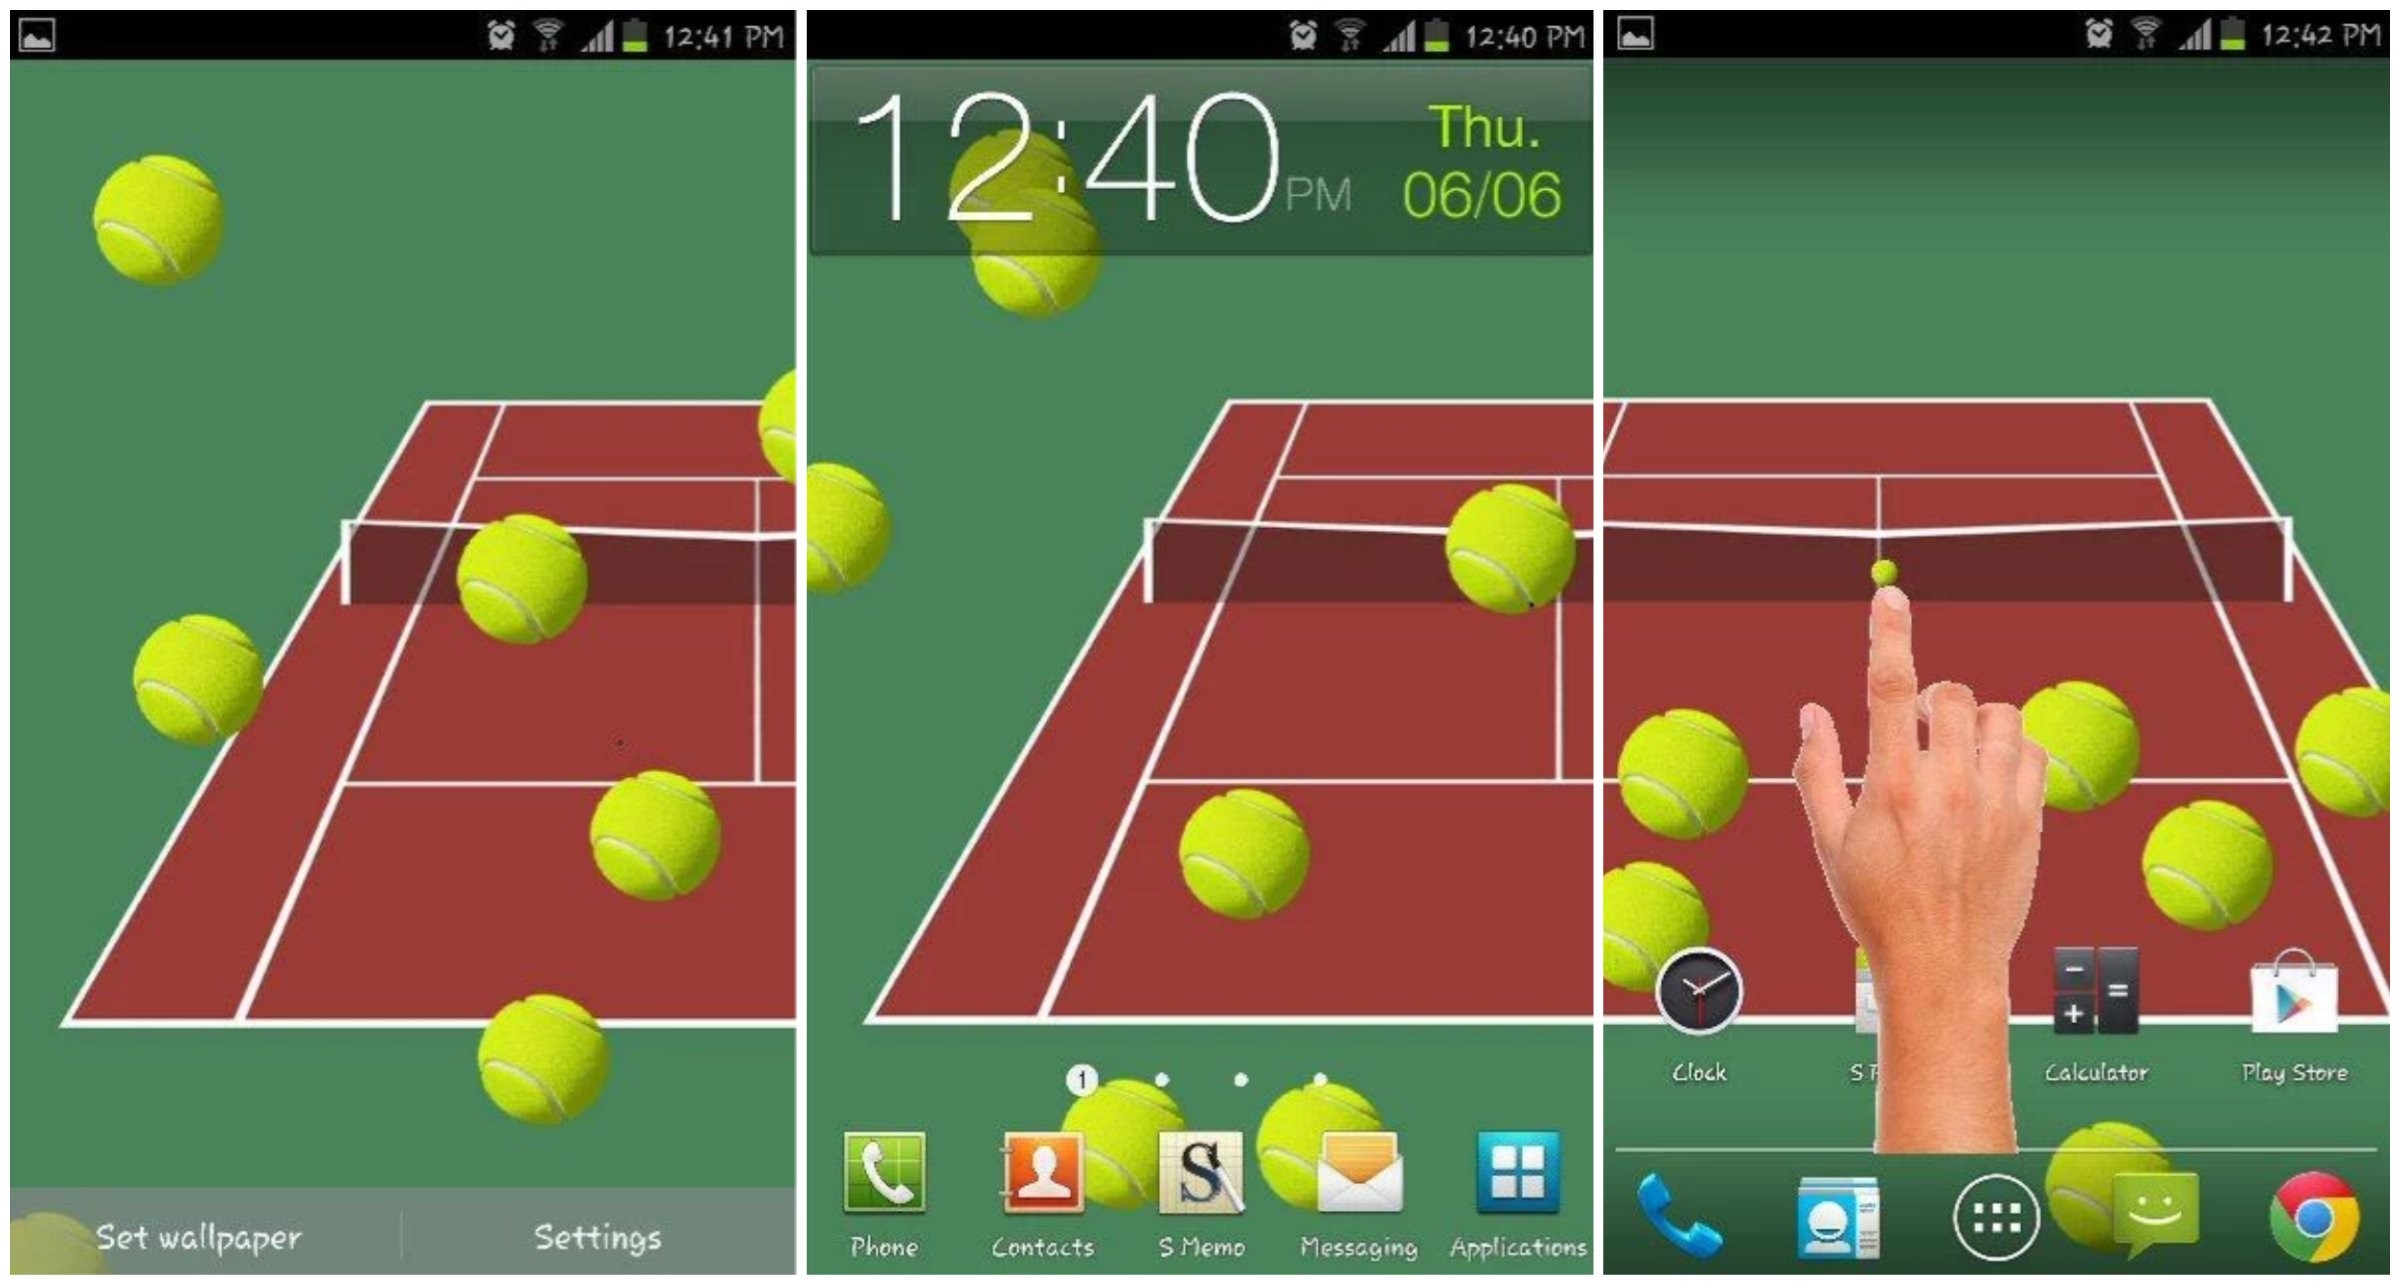 2400x1285 A wallpaper app has already been offered on this list, however, if you are  after a more interactive tennis wallpaper app then Tennis Live Wallpaper is  worth ...